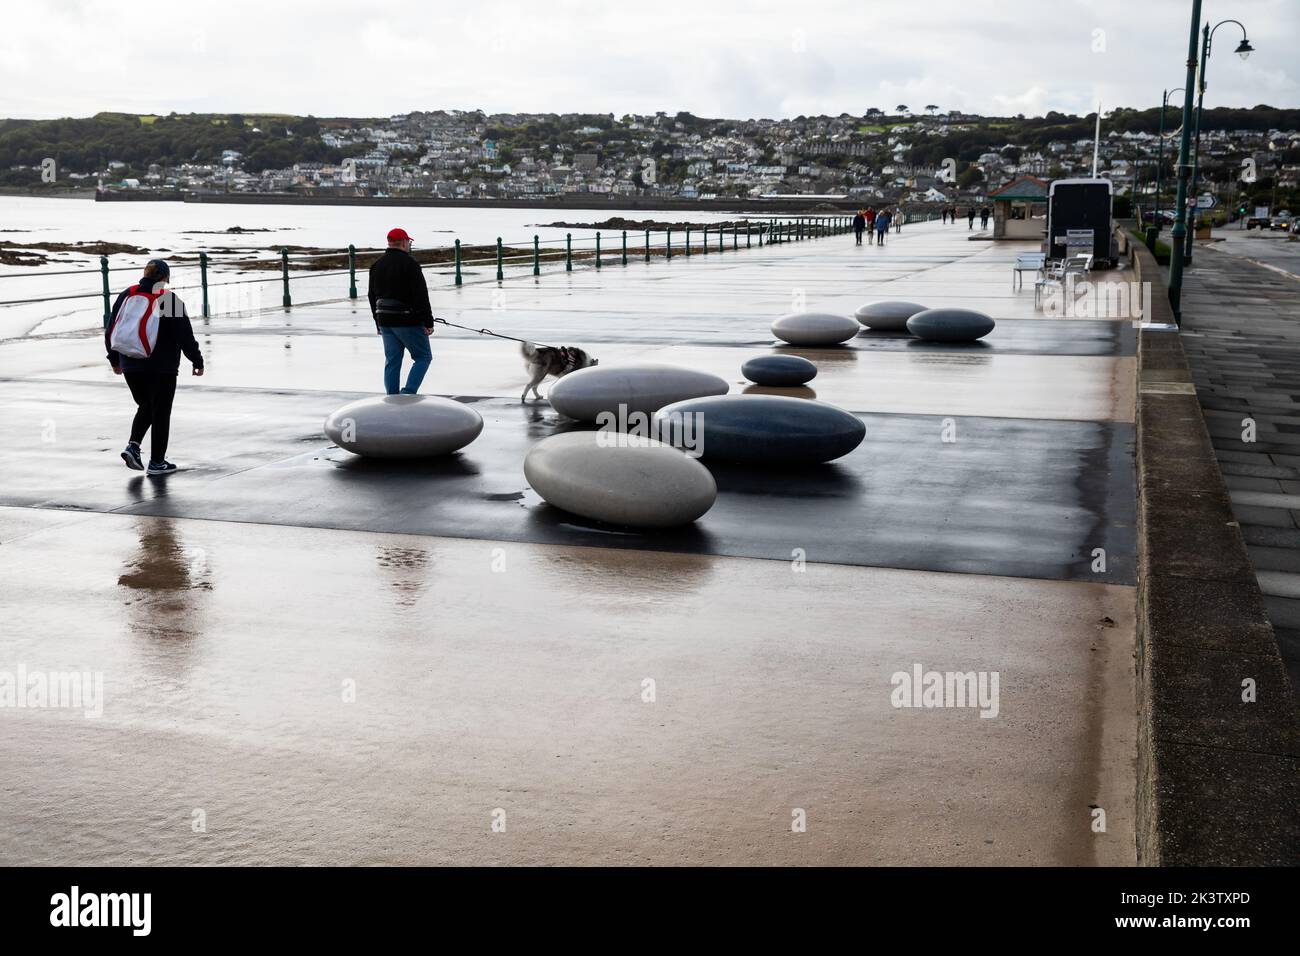 Penzance,Cornwall,28th September 2022,Despite the grey, cloudy dismal weather people strolled along the  promenade in Penzance, Cornwall. The temperature was only 12C with light rain showers and a moderate breeze, it is forecast to be dull and wet for the rest of the week.Credit: Keith Larby/Alamy Live News Stock Photo